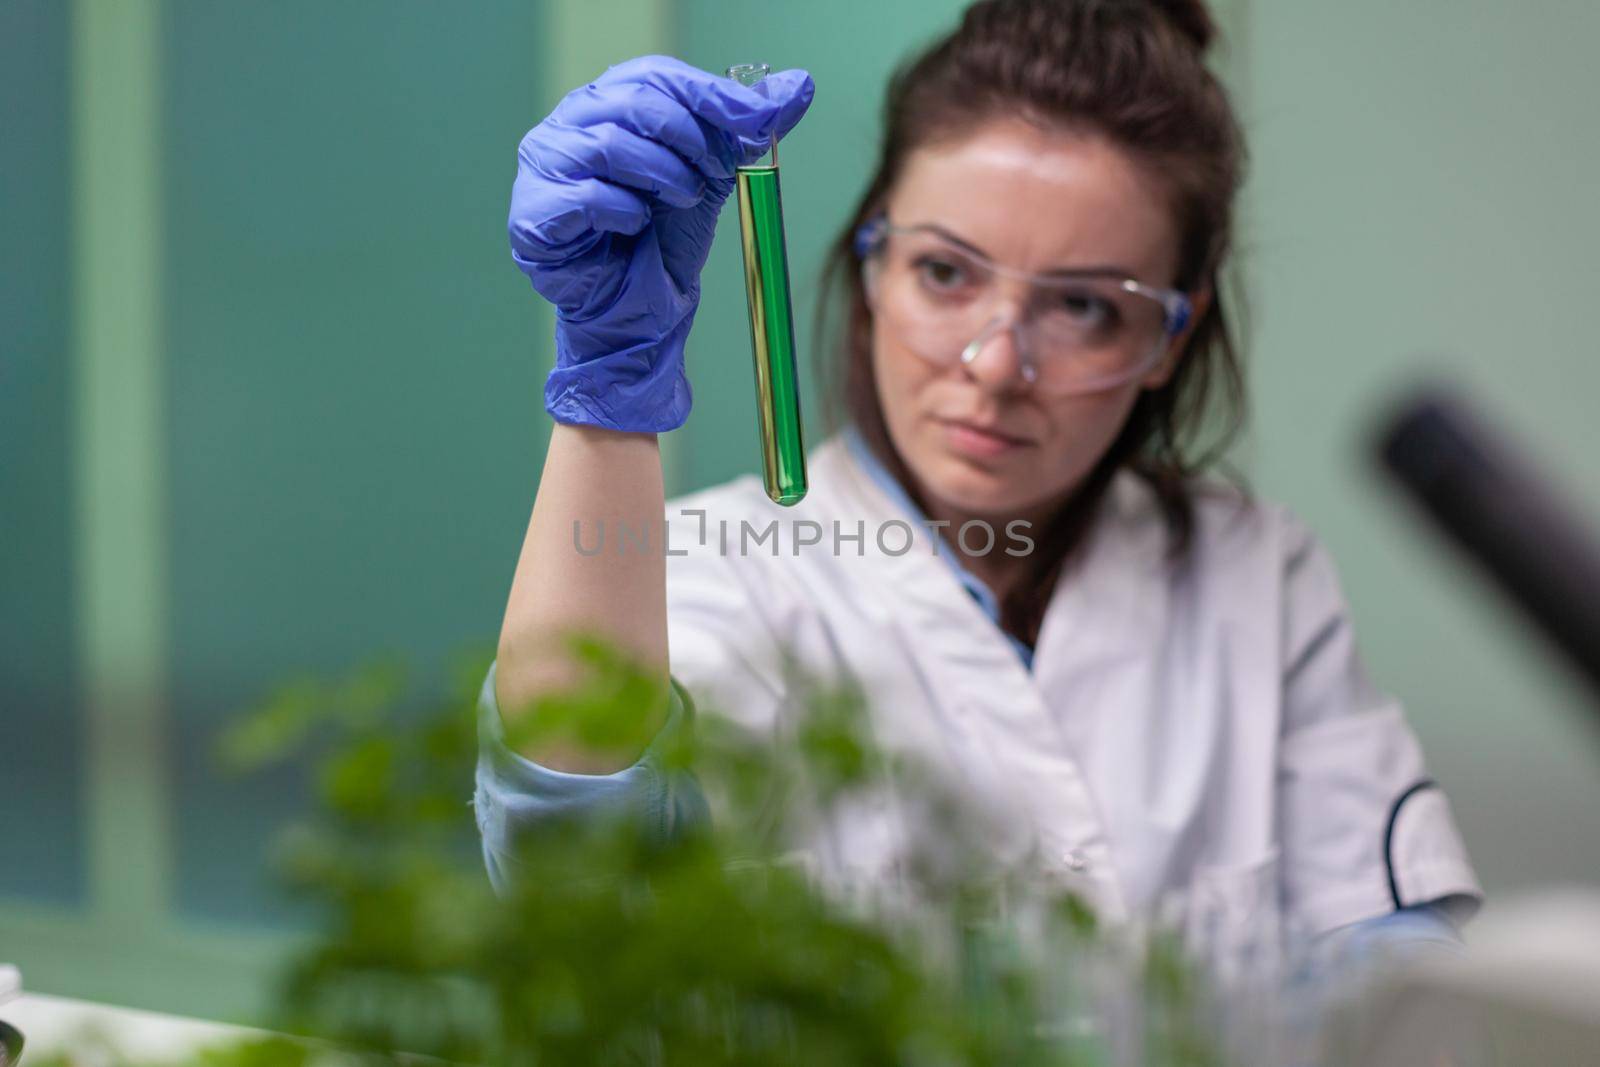 Chemist researcher woman holding test tube with dna liquid observing genetic mutation on sample researching for biochemistry expertise. Scientist biologist working in agriculture laboratory.